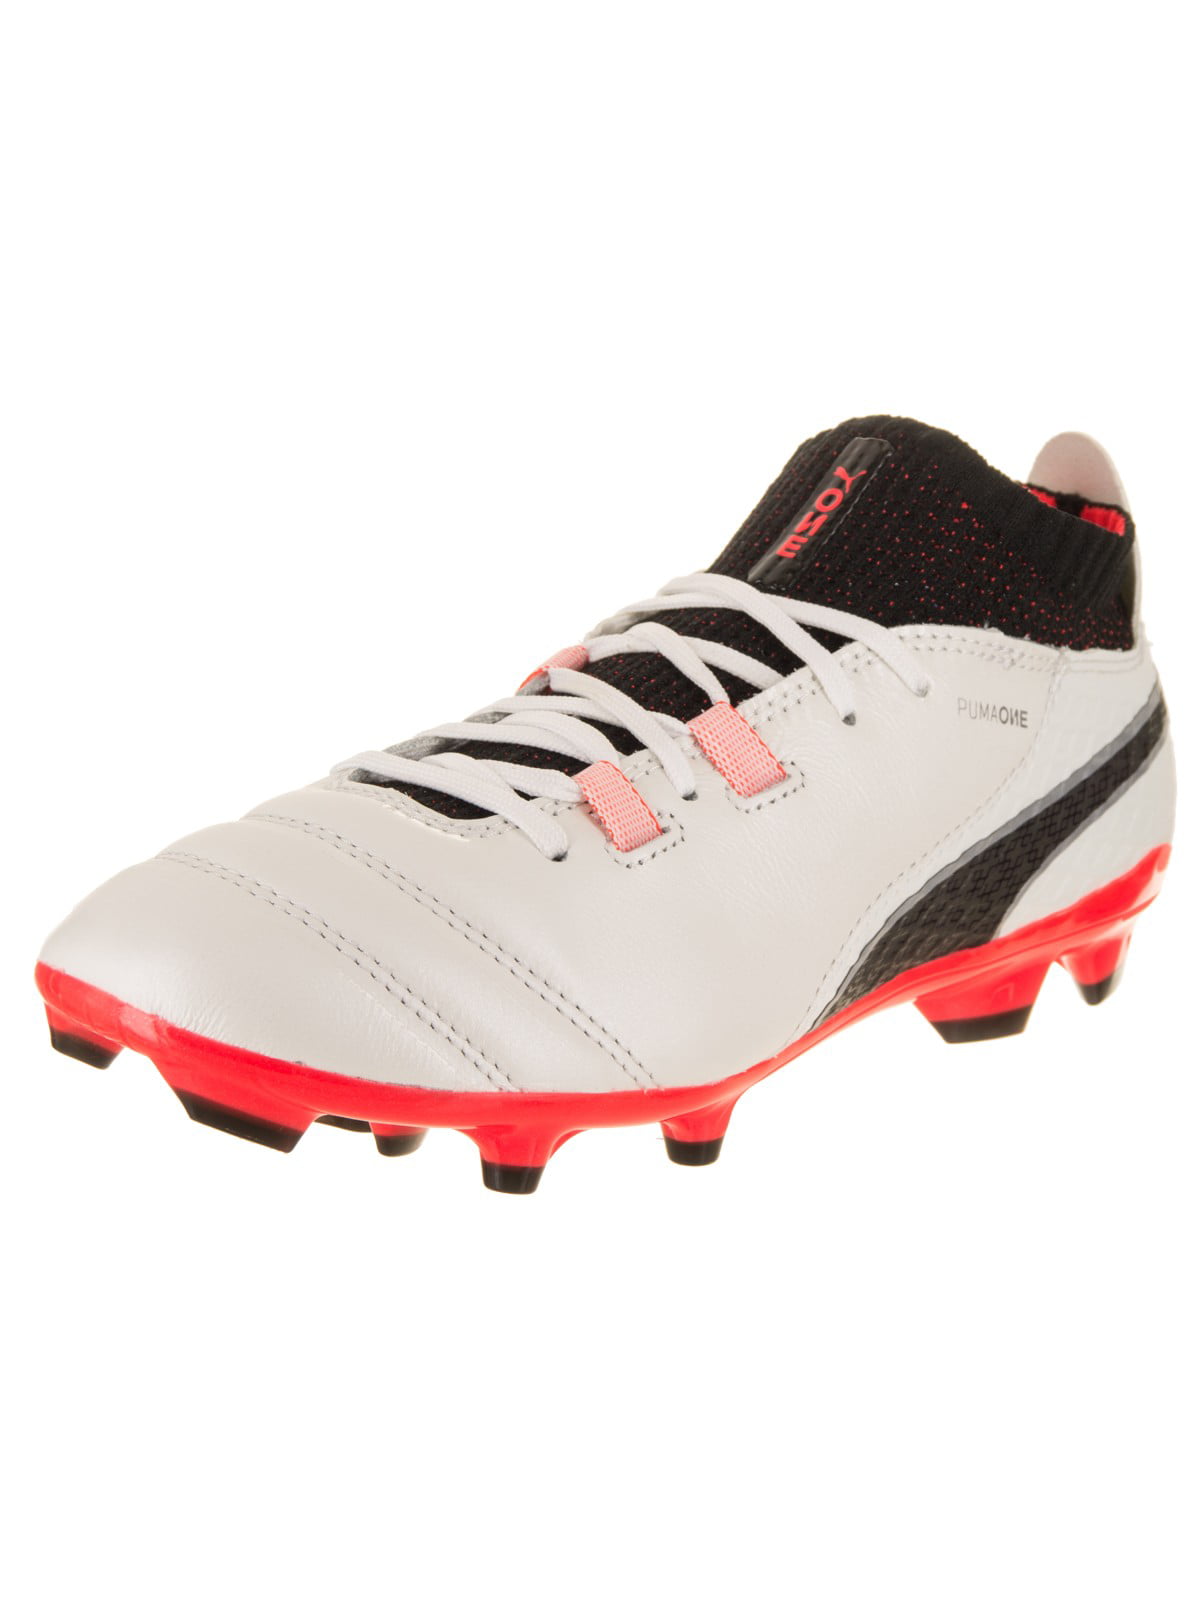 soccer shoes for kids puma